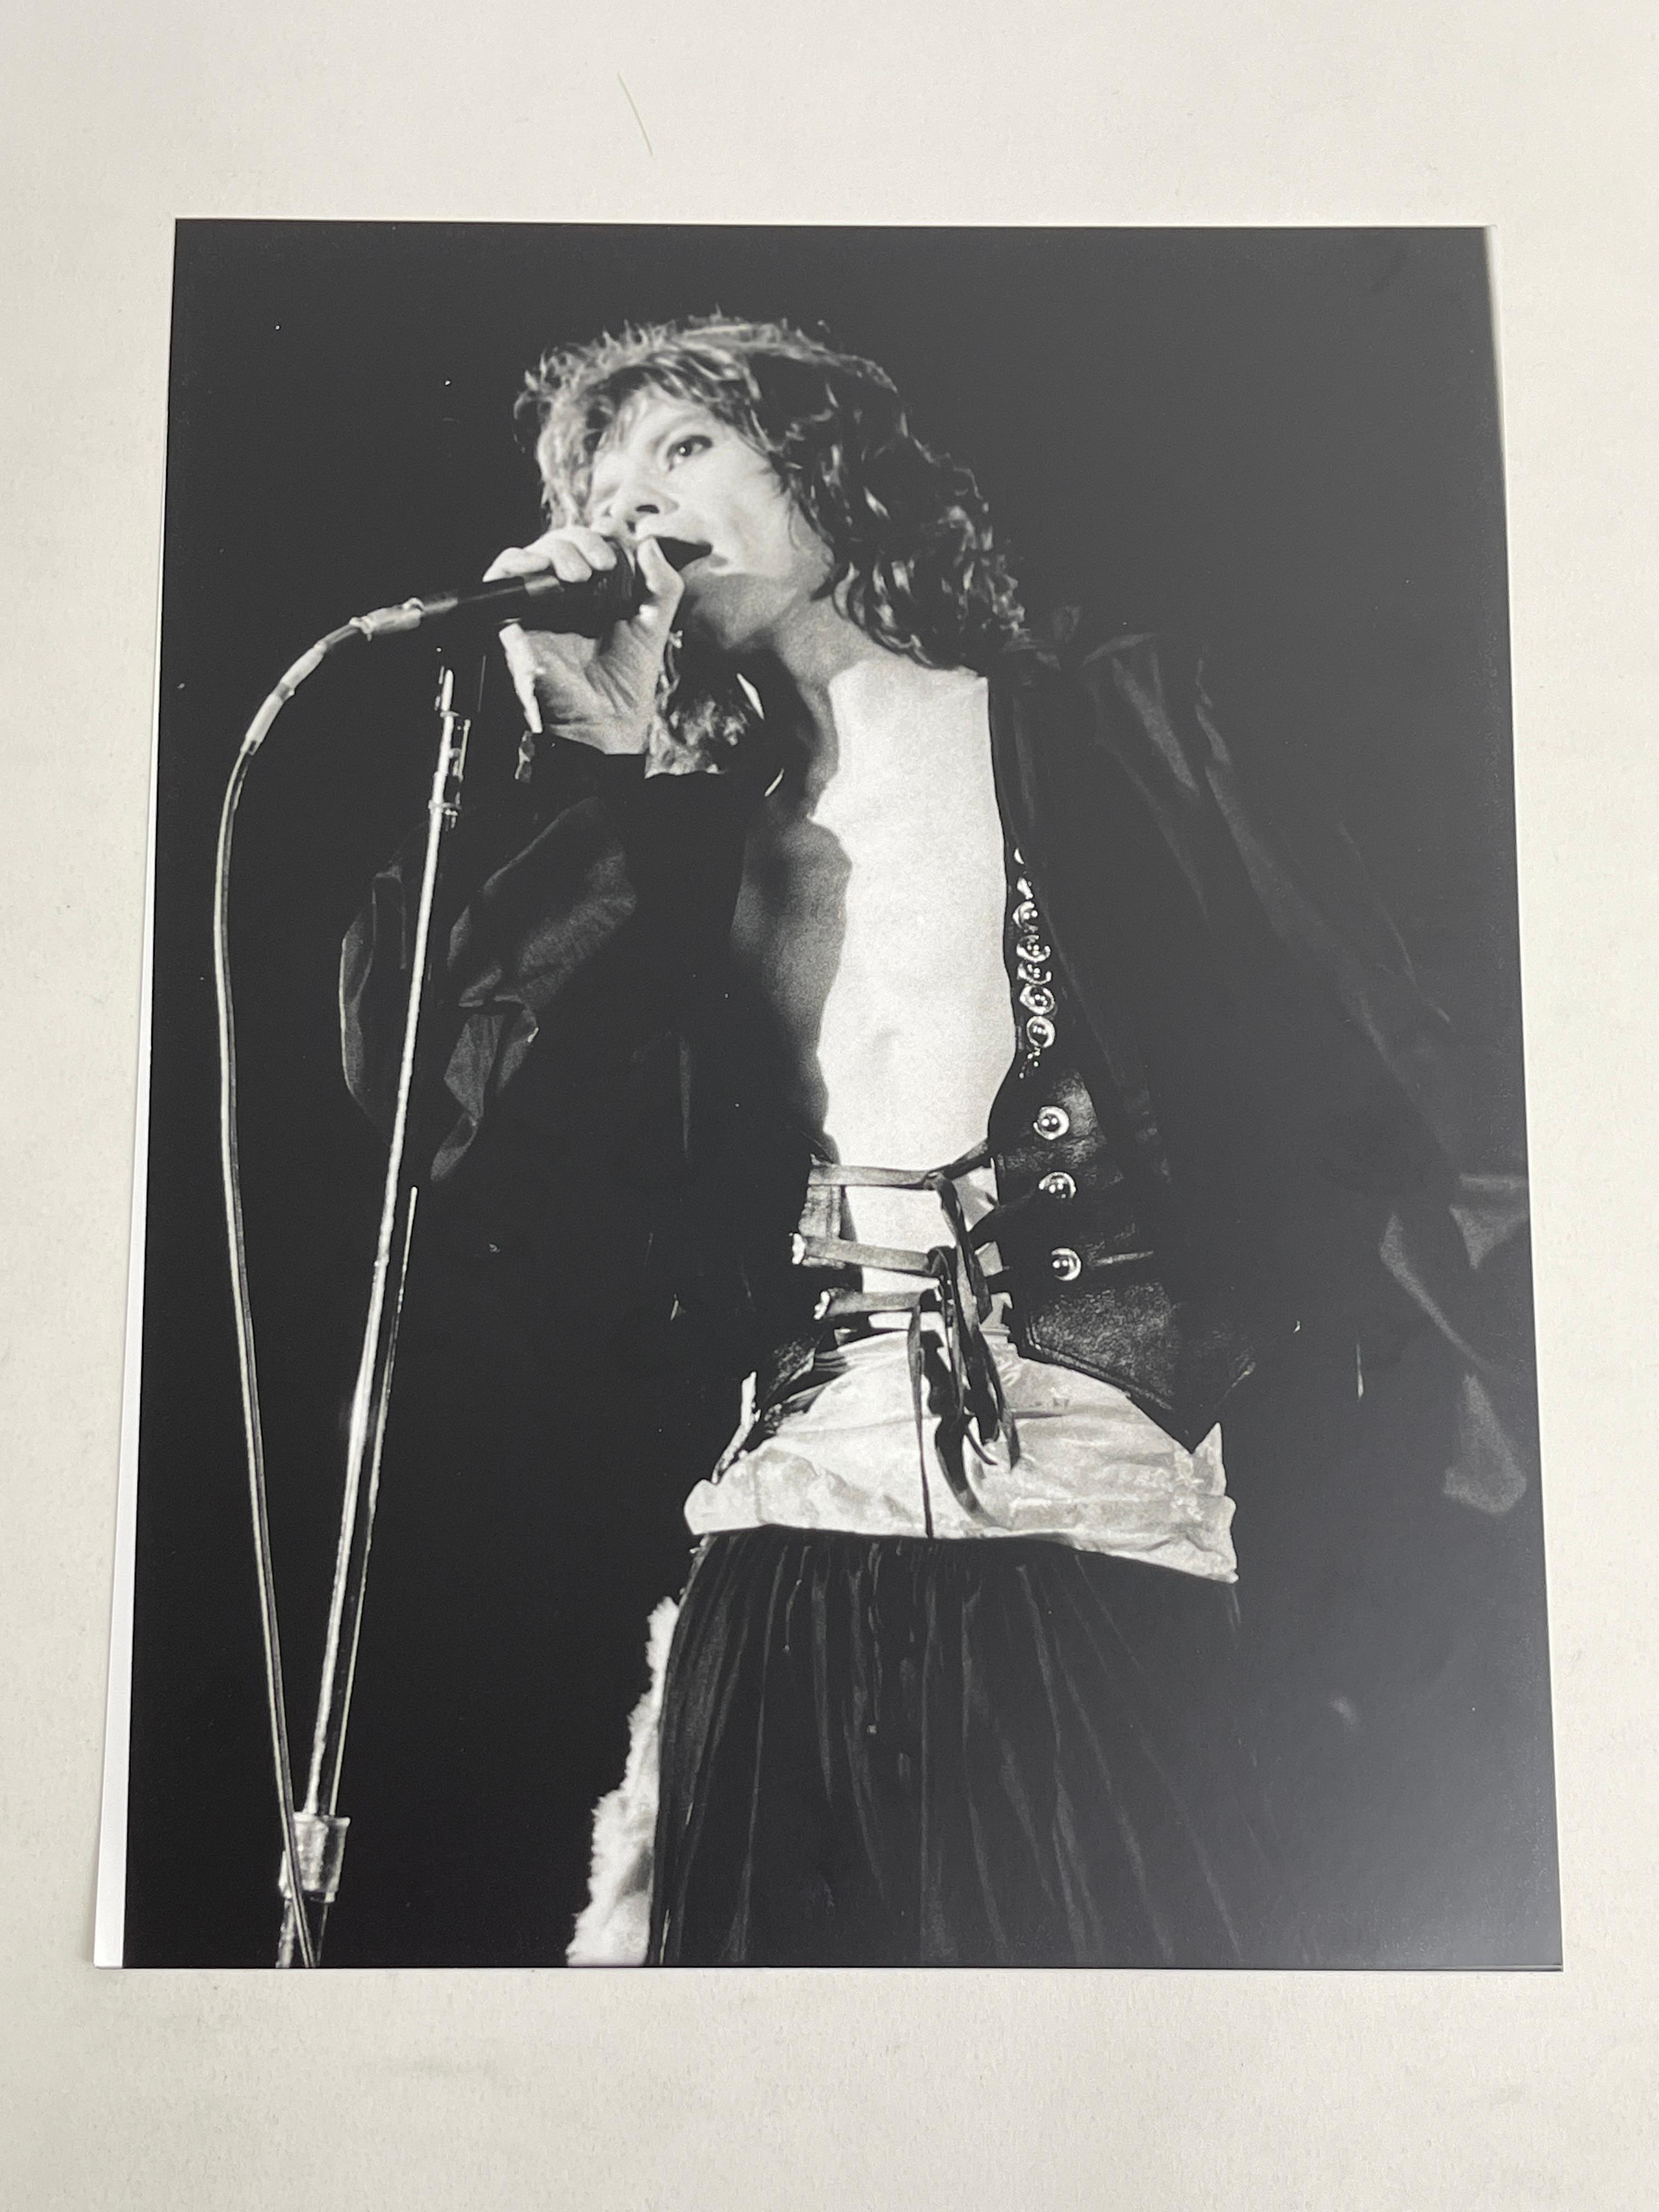 ORIGINAL BLACK AND WHITE  PHOTOGRAPHY MICK JAGGER ROLLING STONES